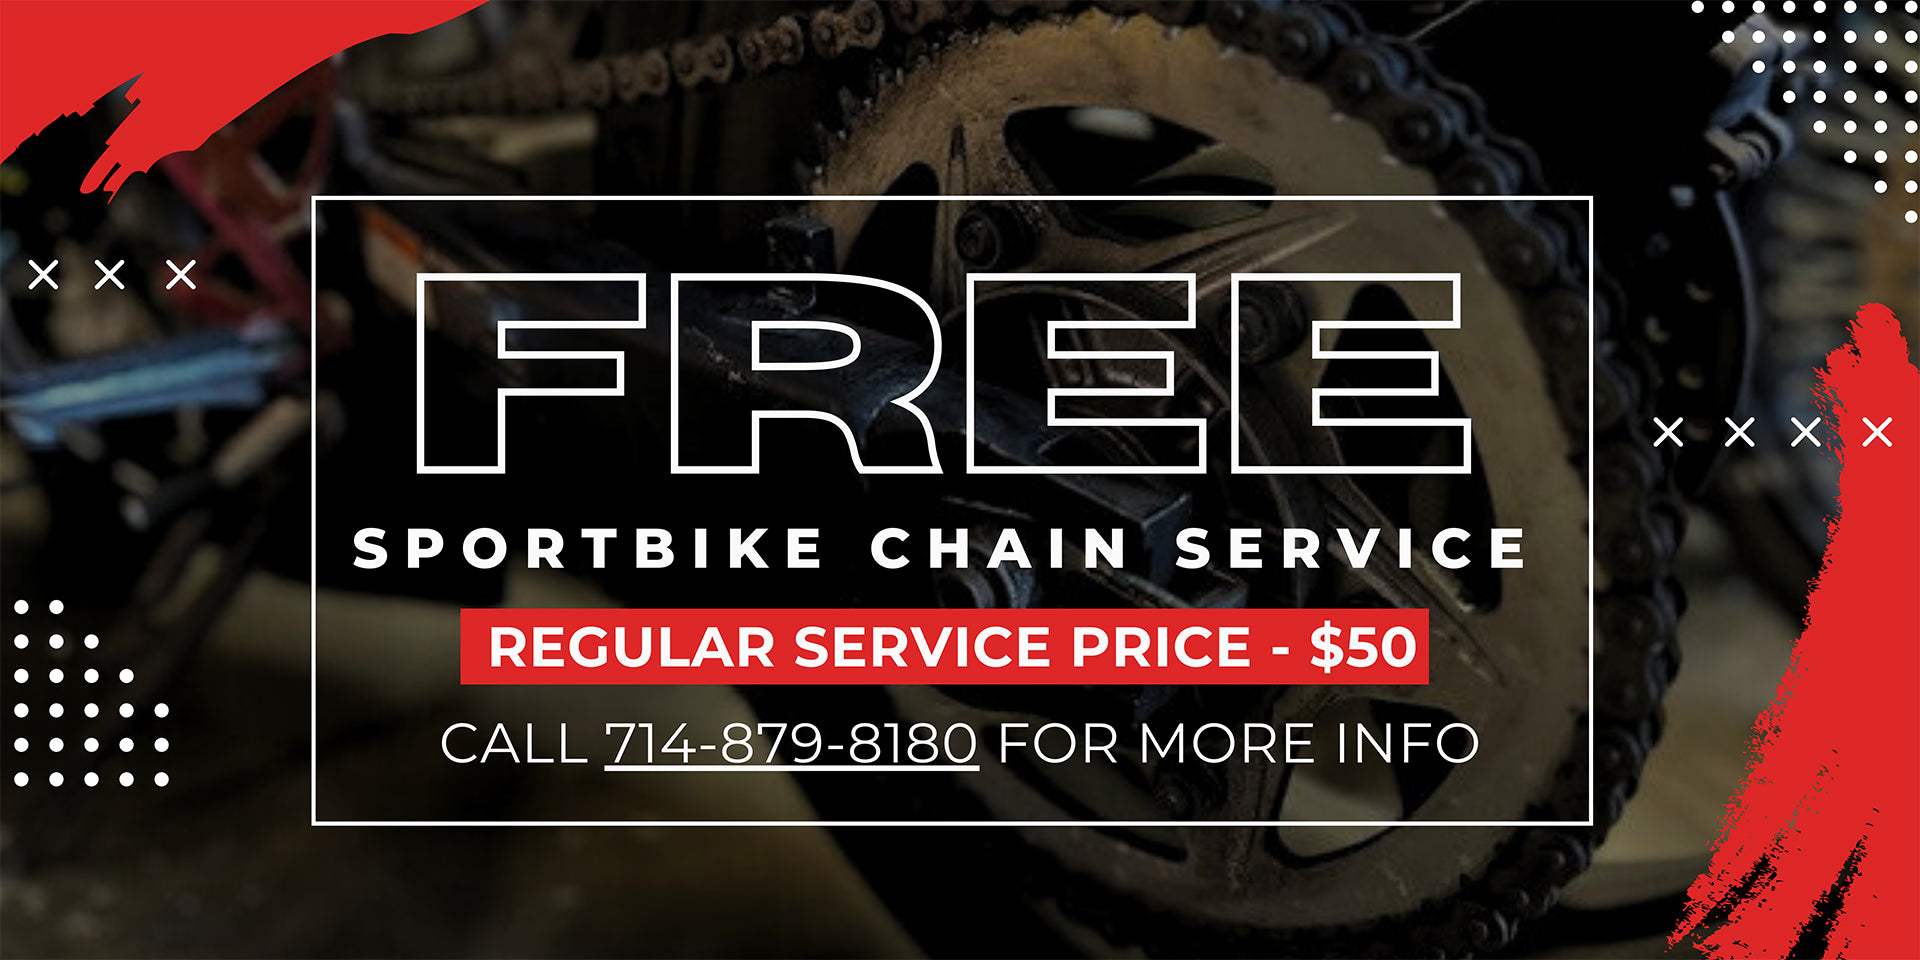 Free Sportbike Chain Service Call 714-879-8180 for more info